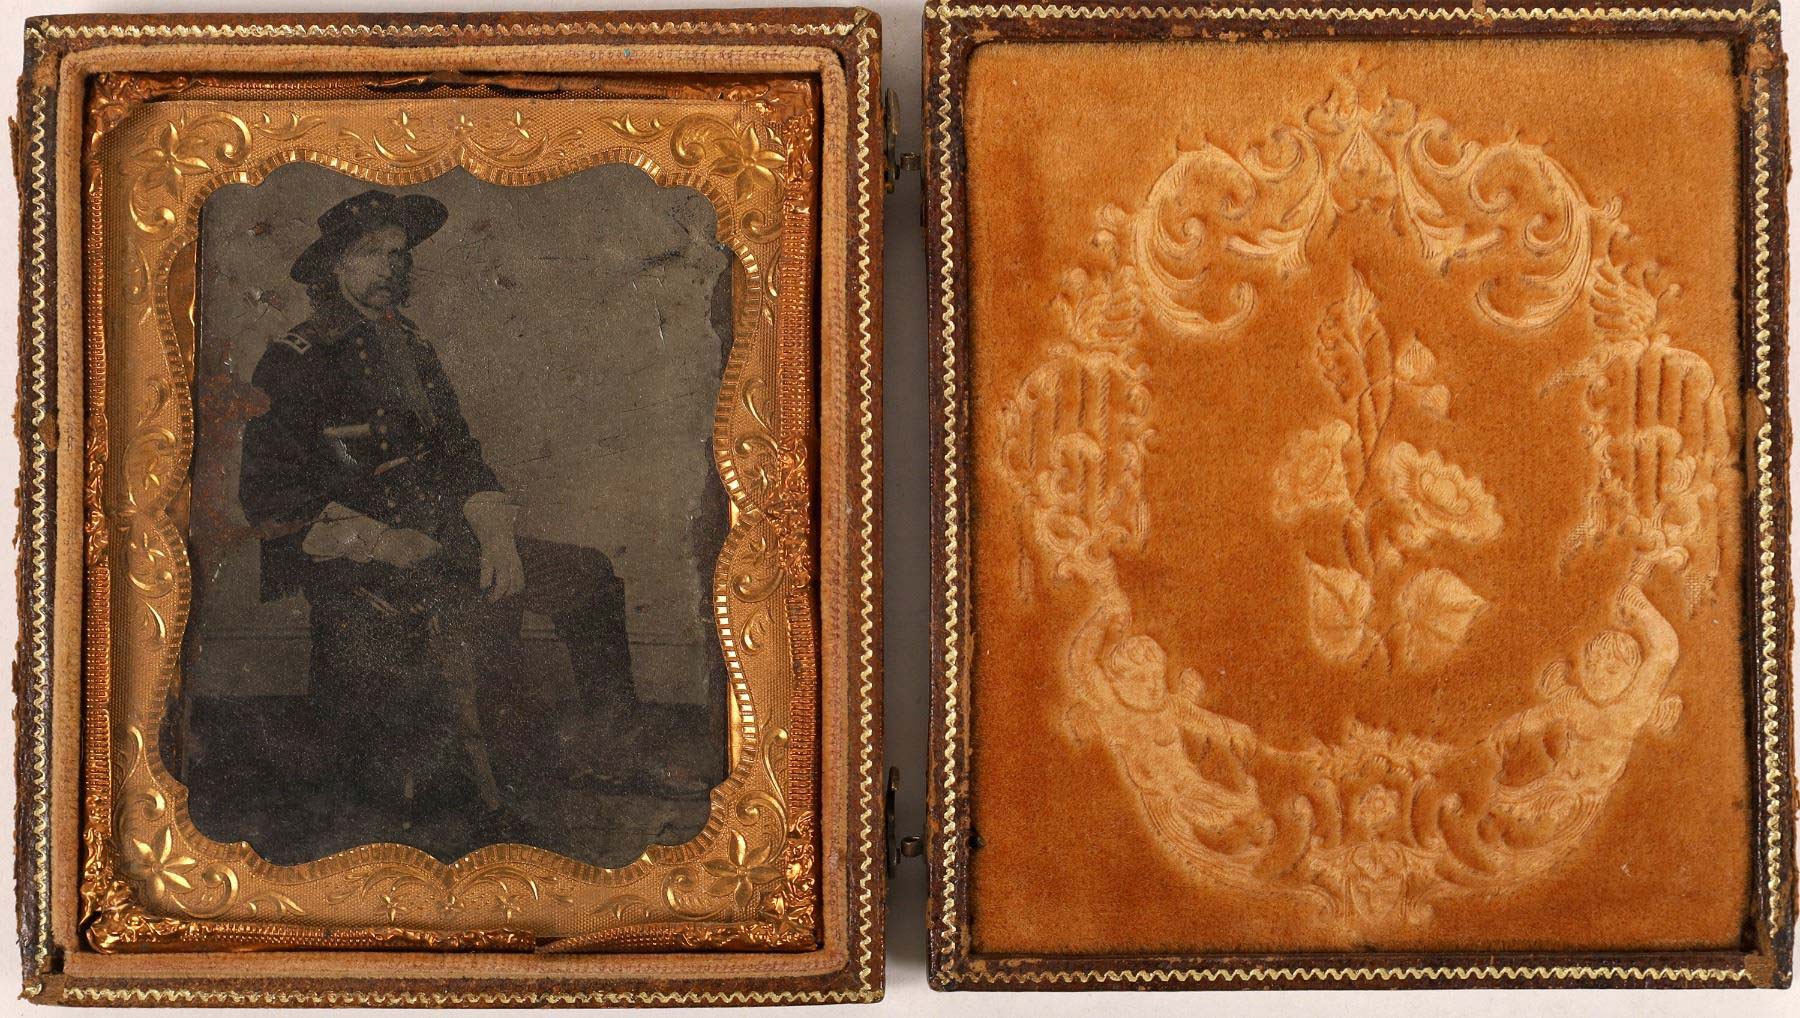 Original tintype of George Armstrong Custer in a non-political case, 3 ¼ inches by 3 ½ inches, taken in 1865 by Matthew Brady, the famous Civil War-era photographer ($5,750). Image courtesy Holabird Western Americana Auctions and Live Auctioneers.